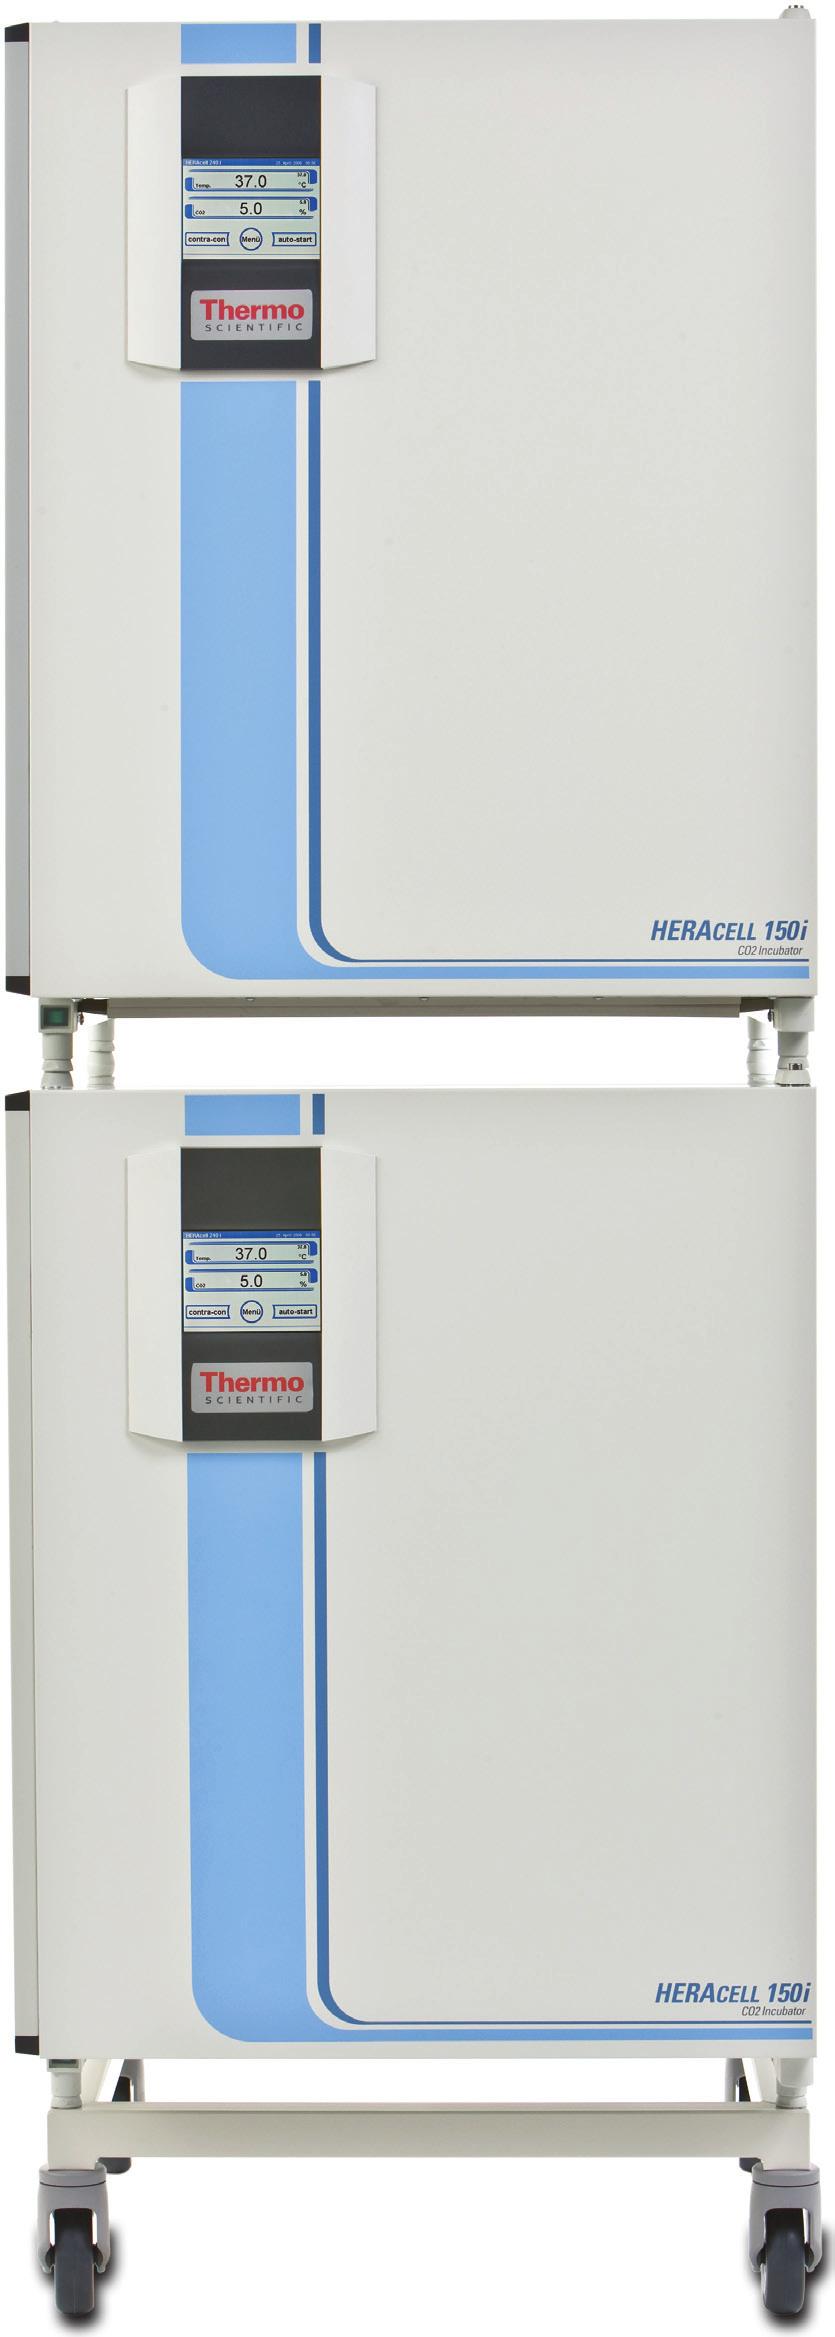 The IR-CO2 gas tester performs to GMP/GLP standards.